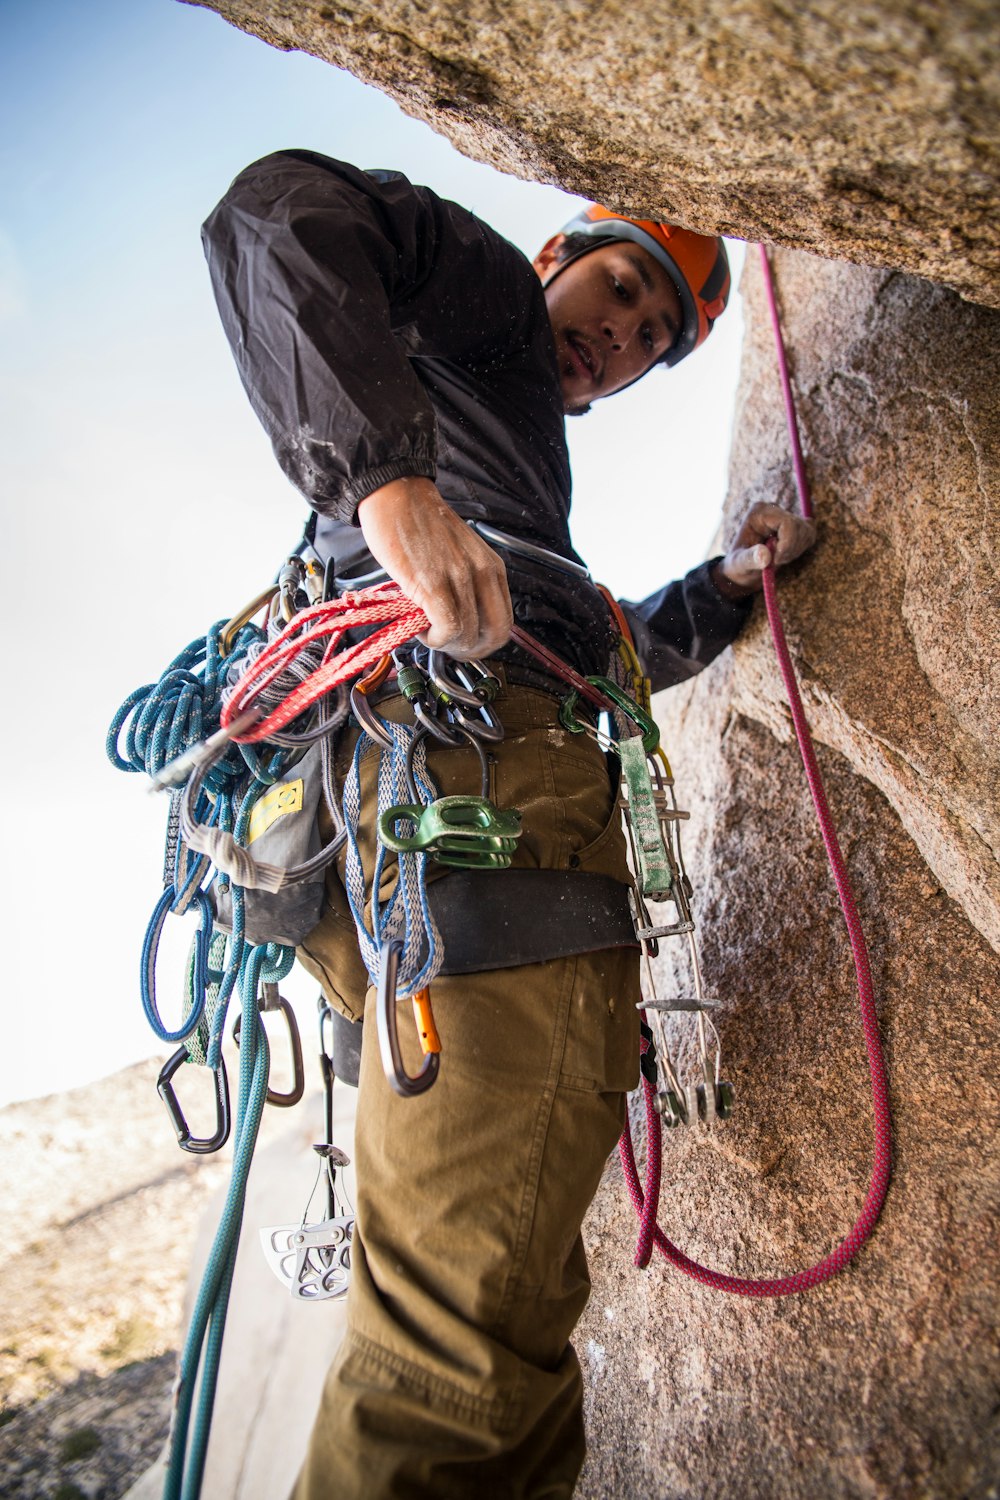 rock climber holding red rope strapped on waist while on side of brown boulder at daytime